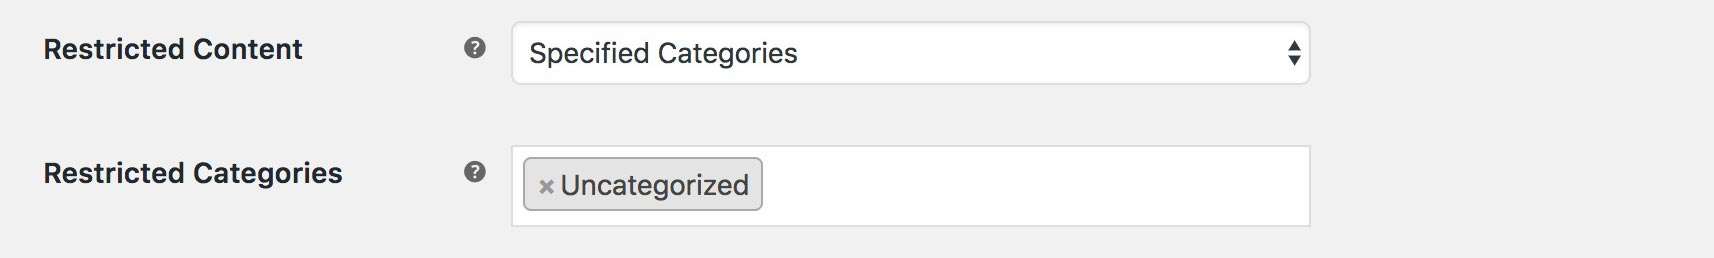 WooCommerce restricted categories setting